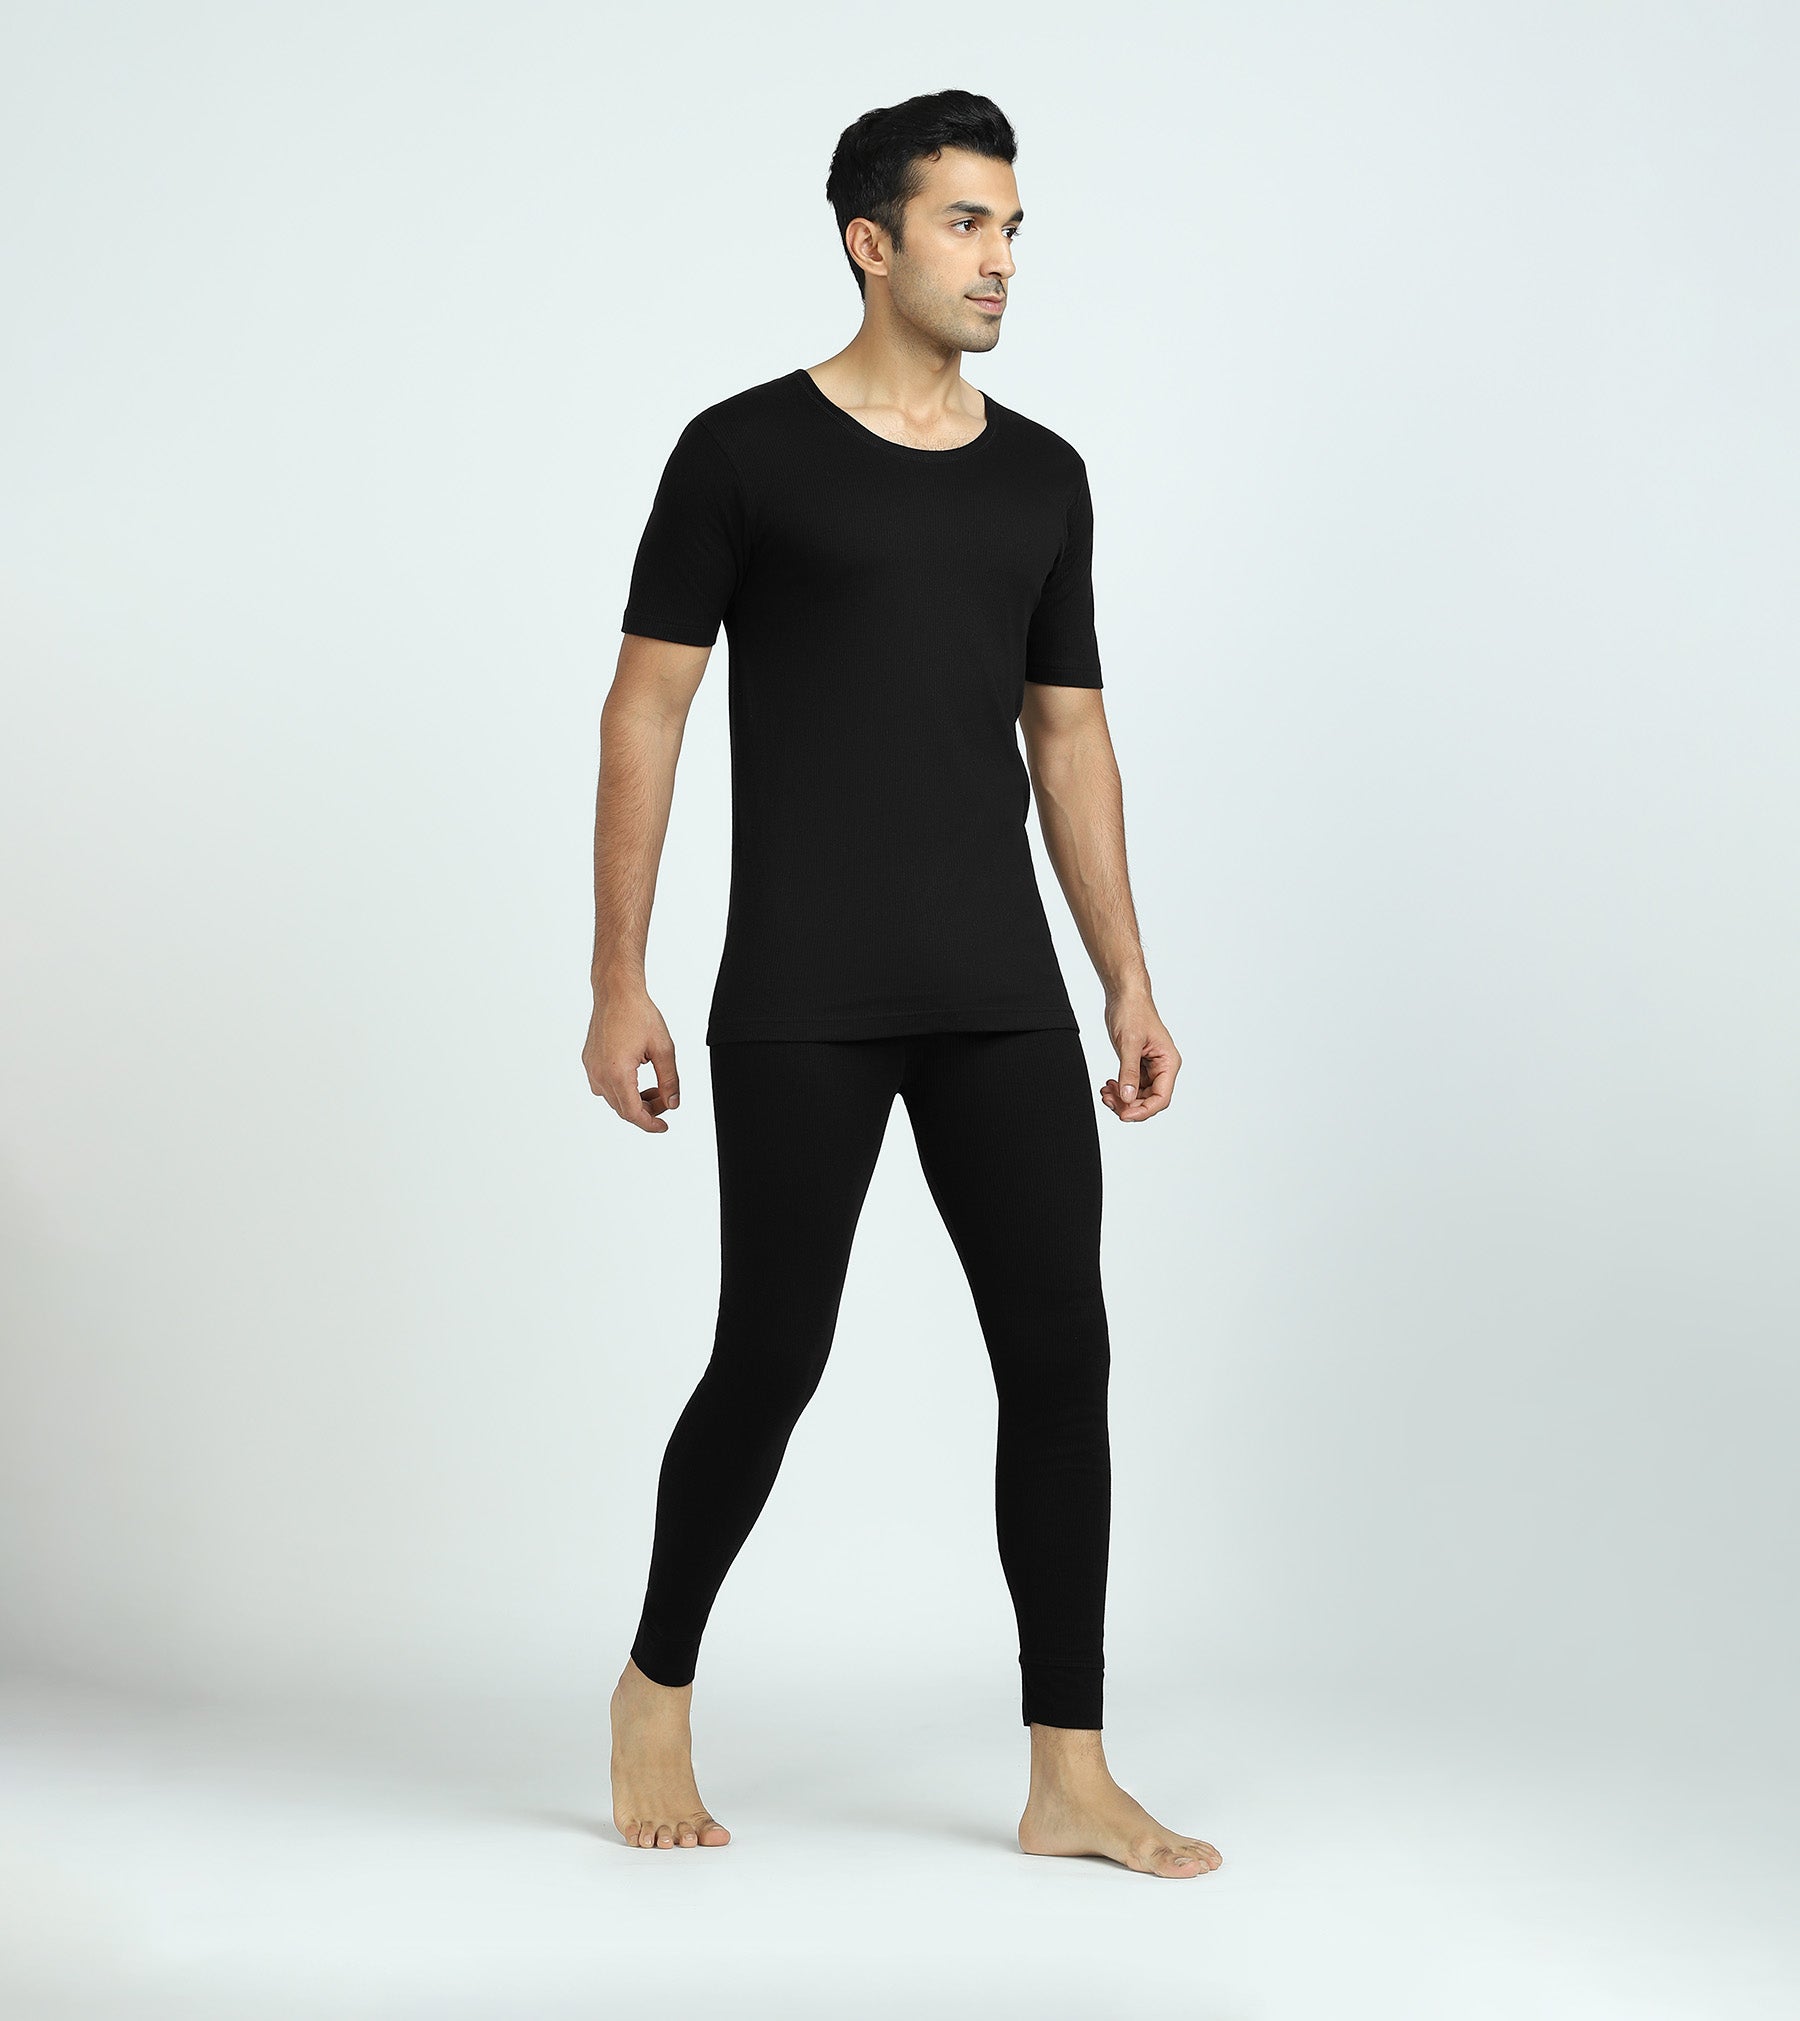 Fireproof Thermal Underwear Suit Protective Clothing Pants Wear